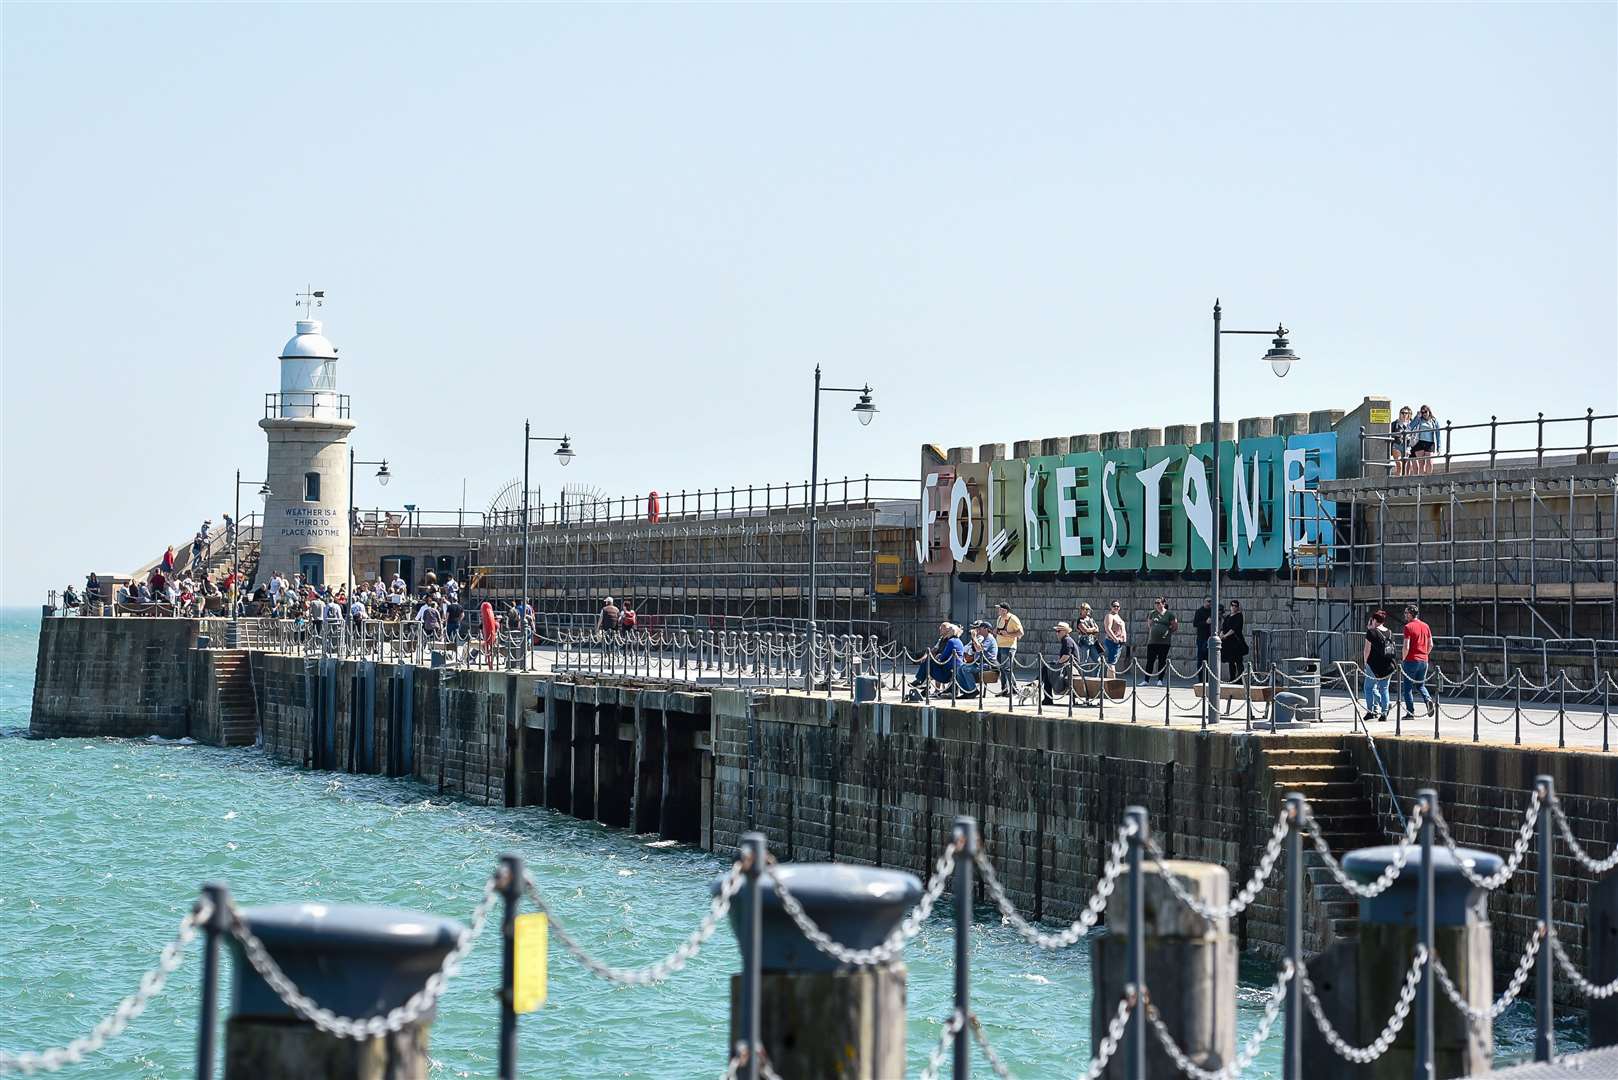 Millions of people visit the Harbour Arm each year